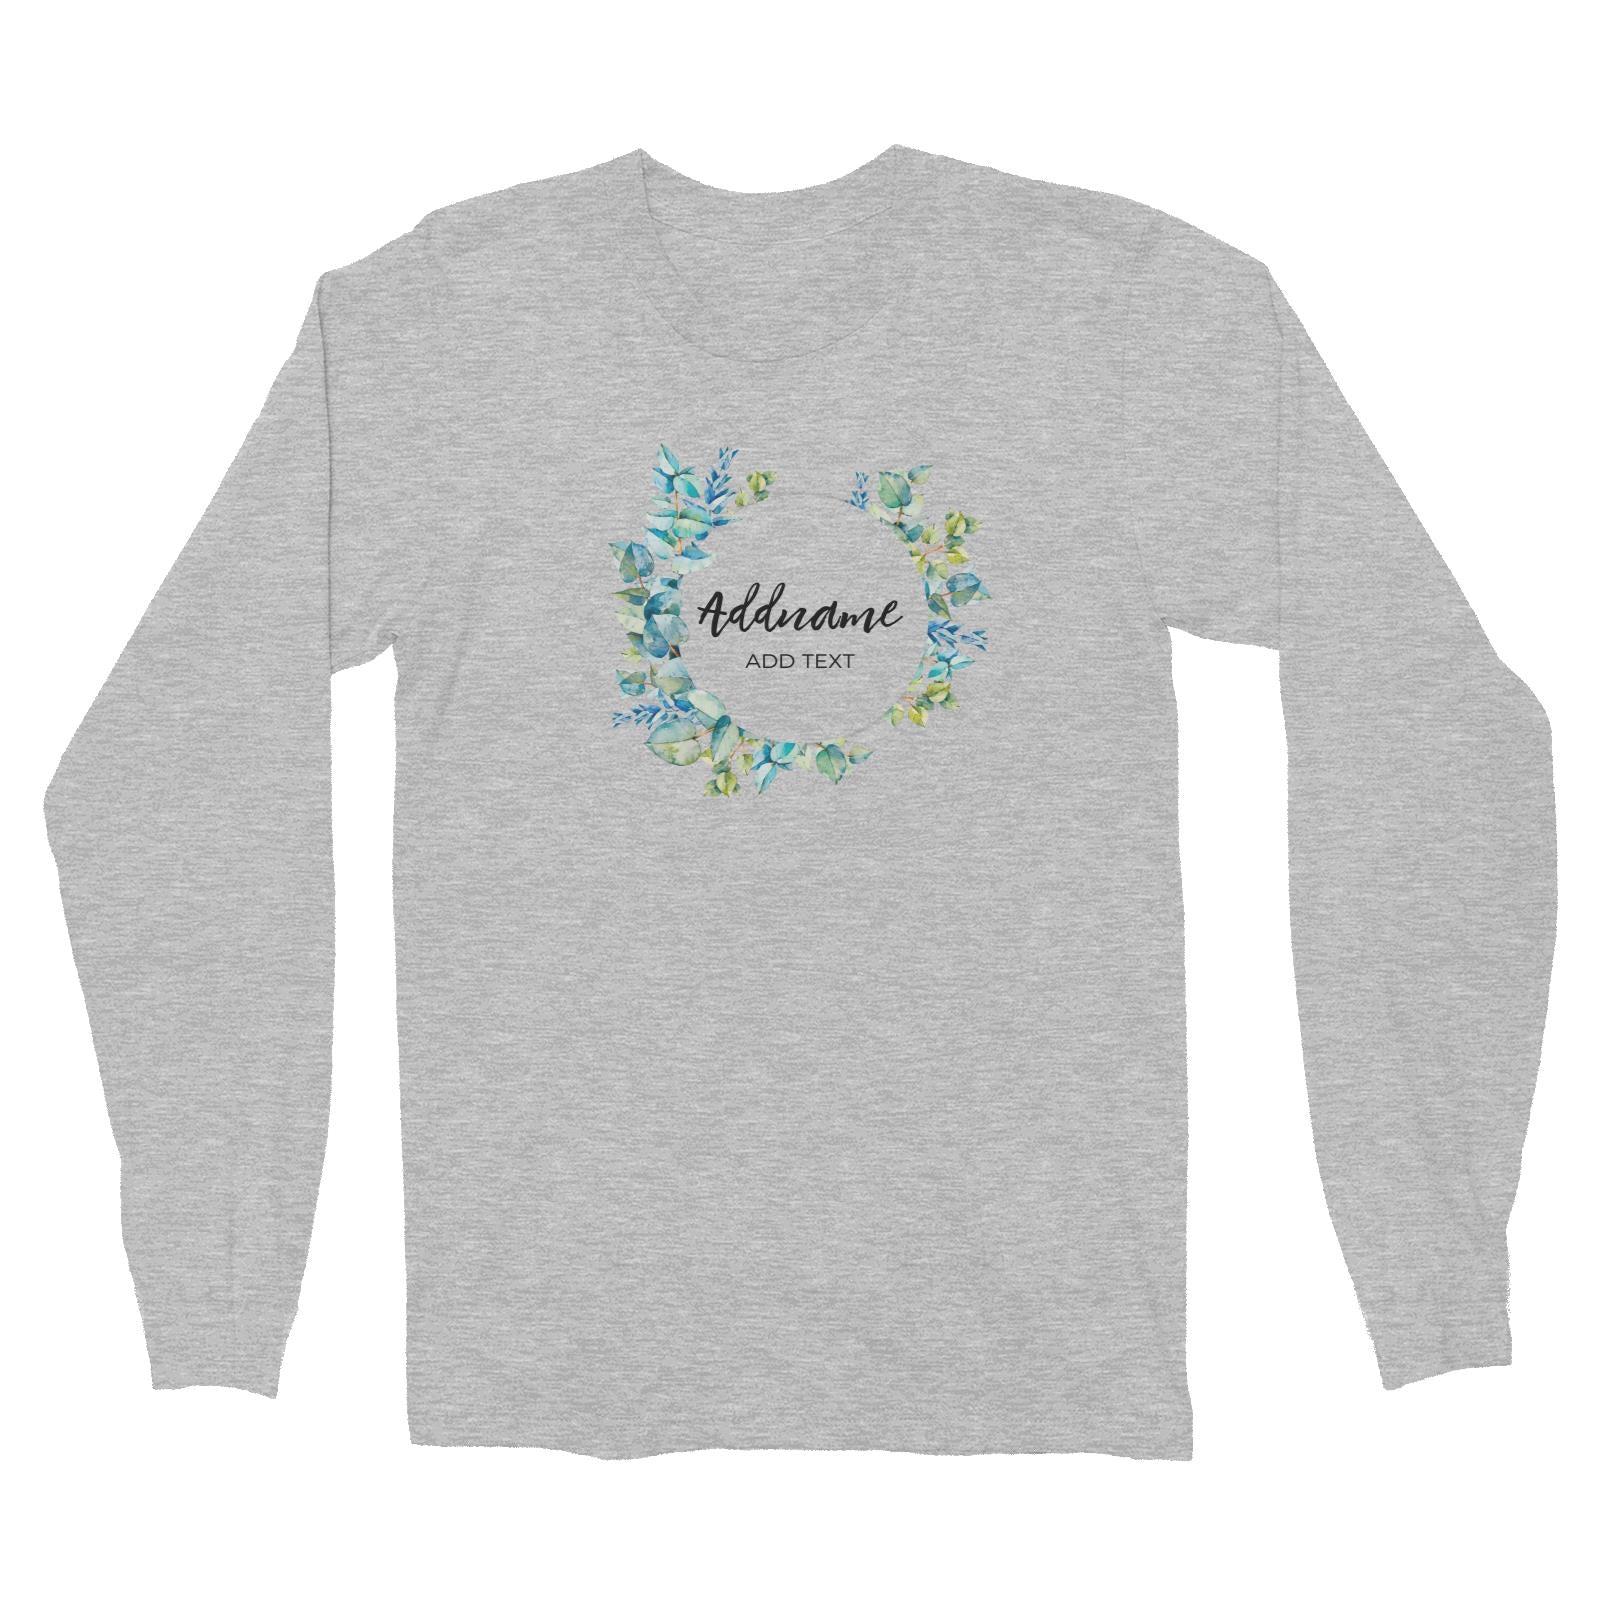 Add Your Own Text Teacher Blue Leaves Wreath Addname And Add Text Long Sleeve Unisex T-Shirt